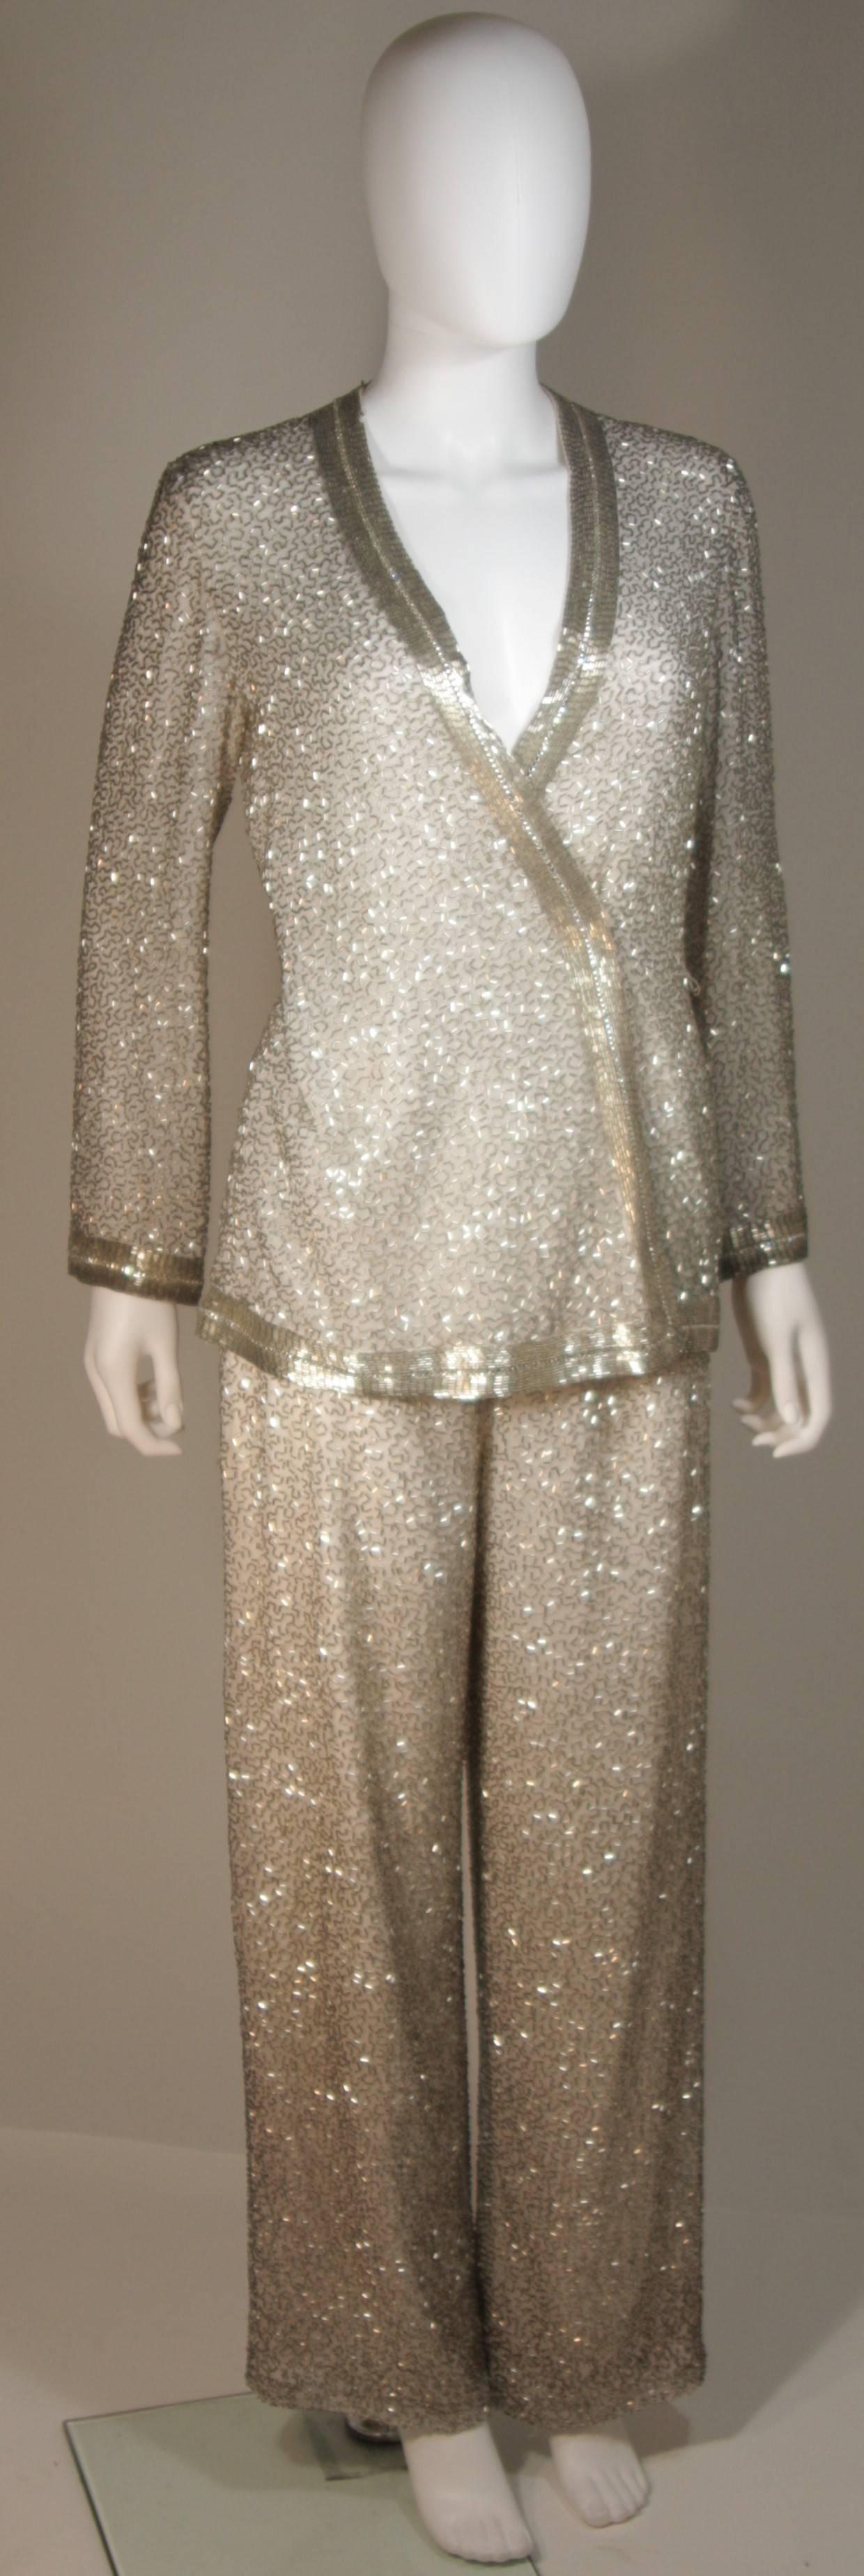 Silver and White Silk Beaded Pant Suit with Palazzo Pants Size Medium Large In Excellent Condition For Sale In Los Angeles, CA